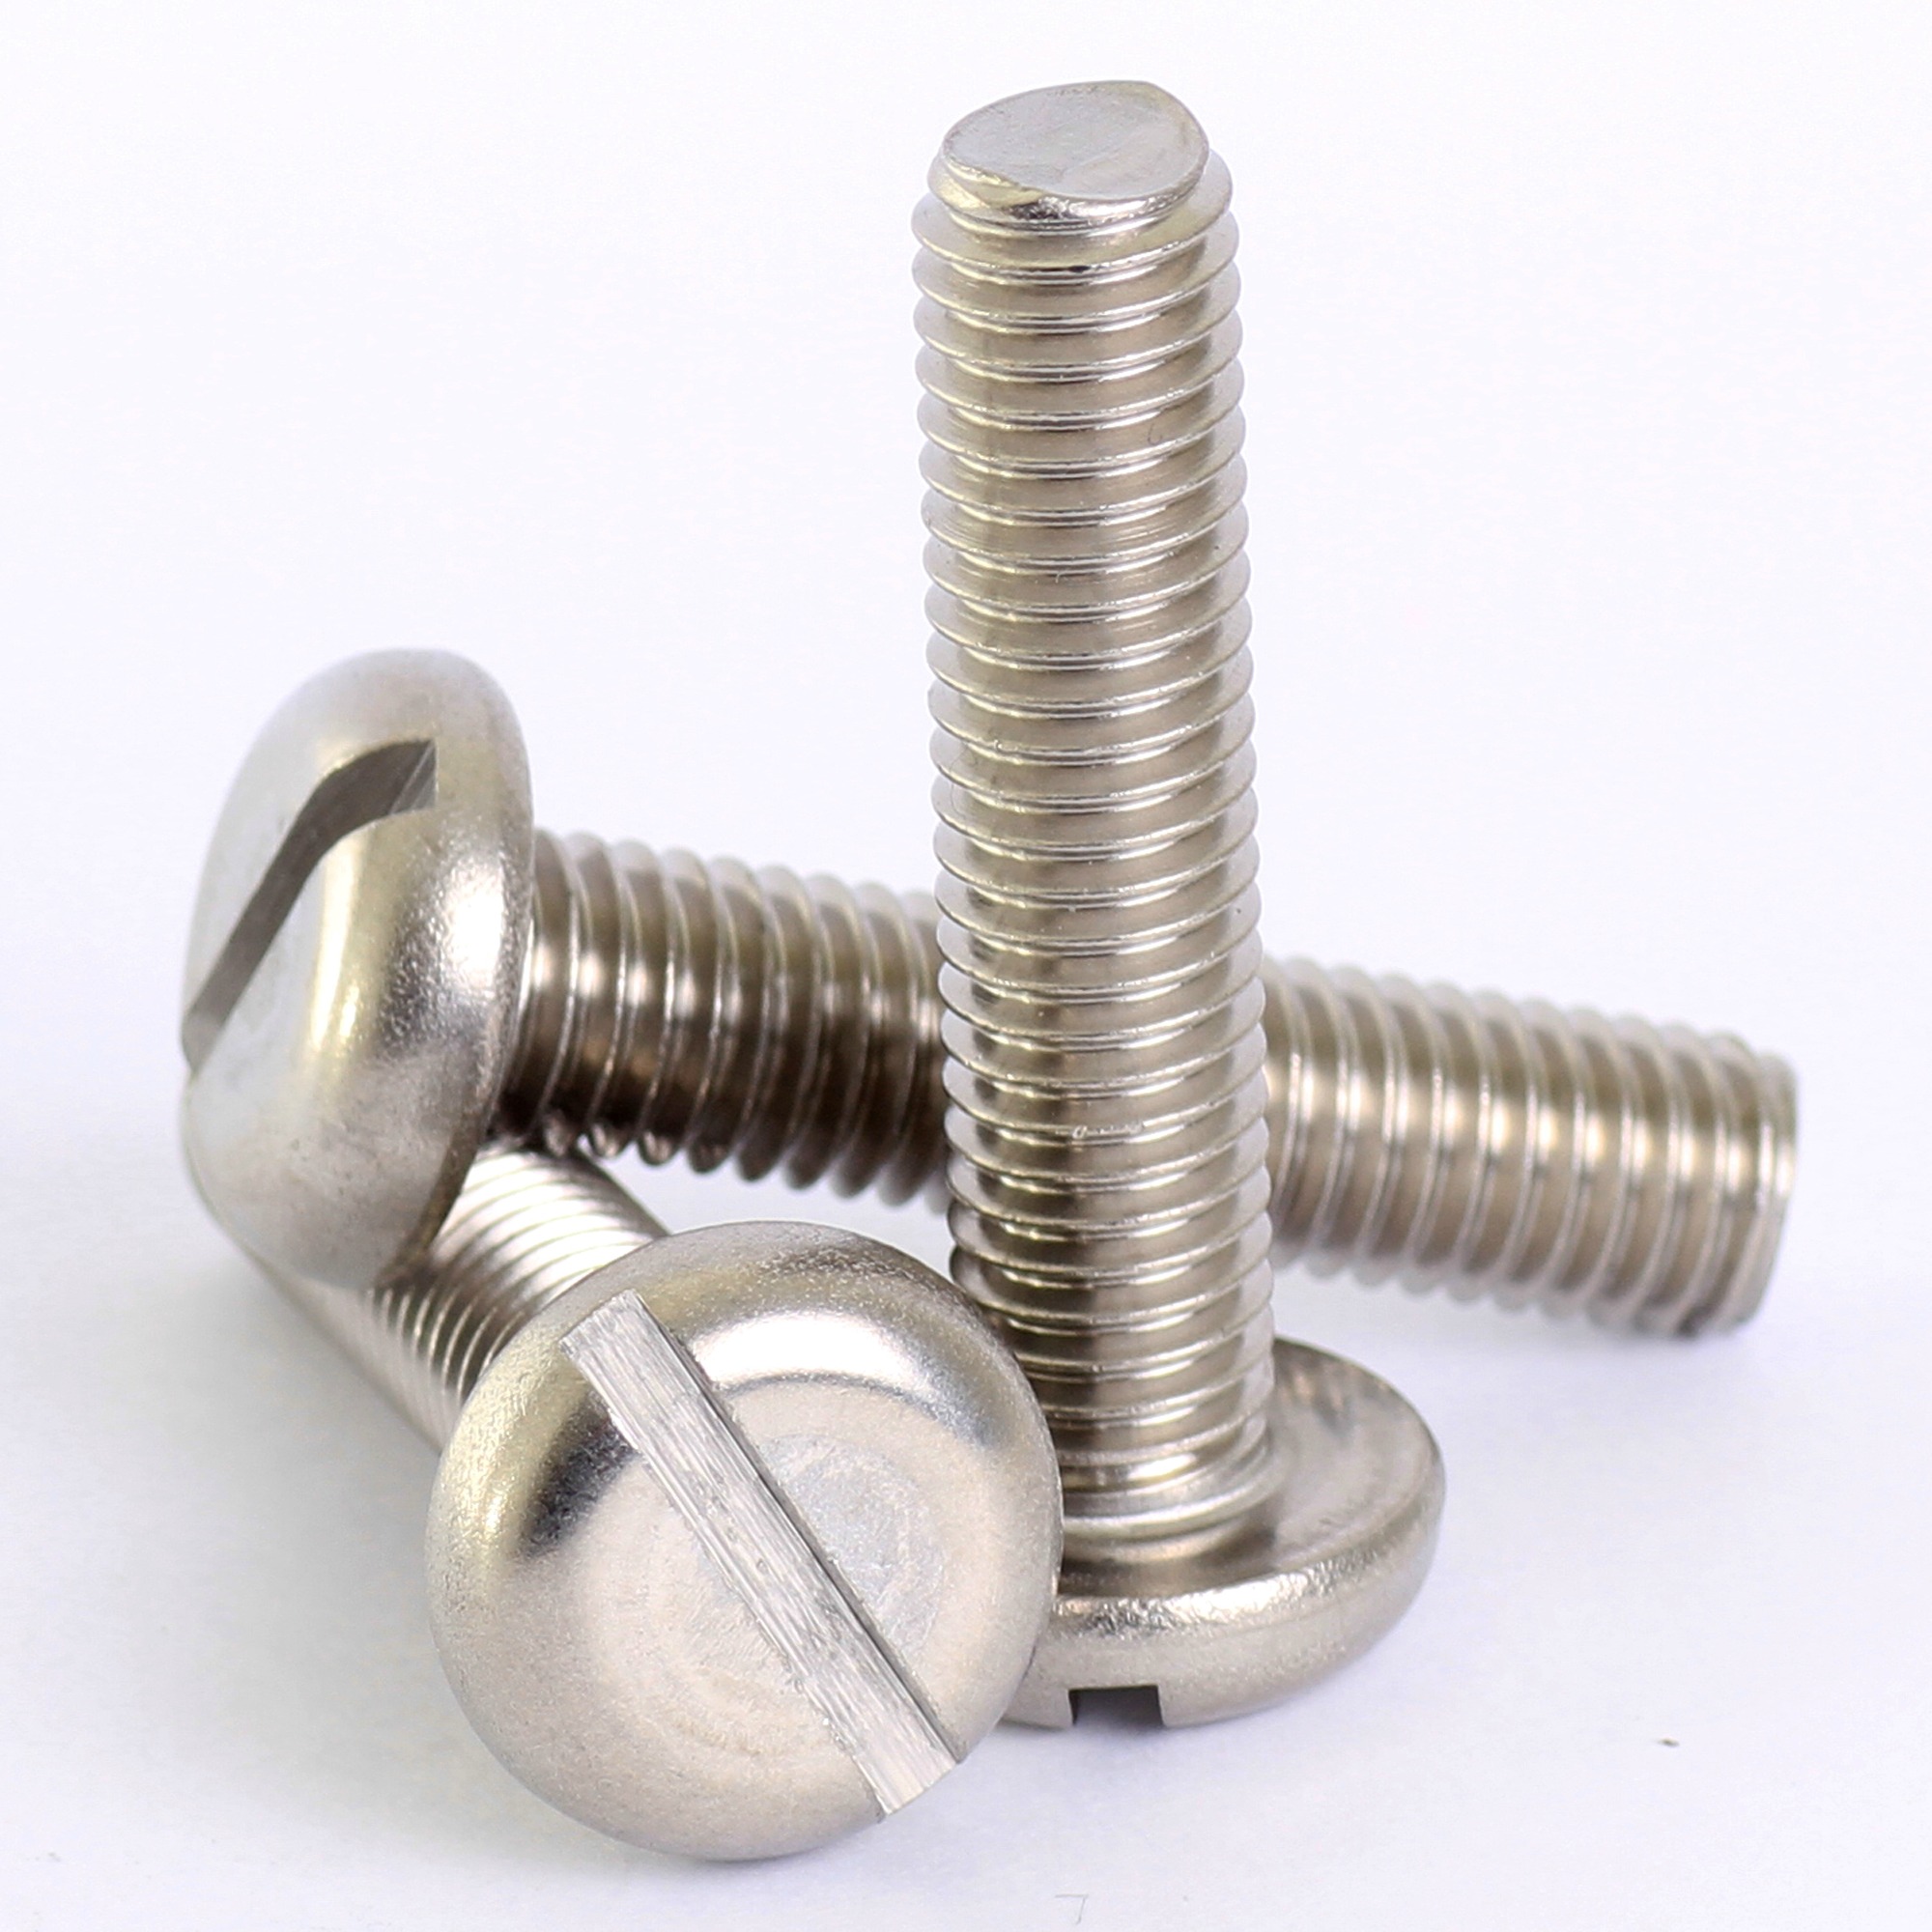 M3 x 16 Stainless Cheese Machine Head Screws 3 mm x 16 mm slotted cheese head x20